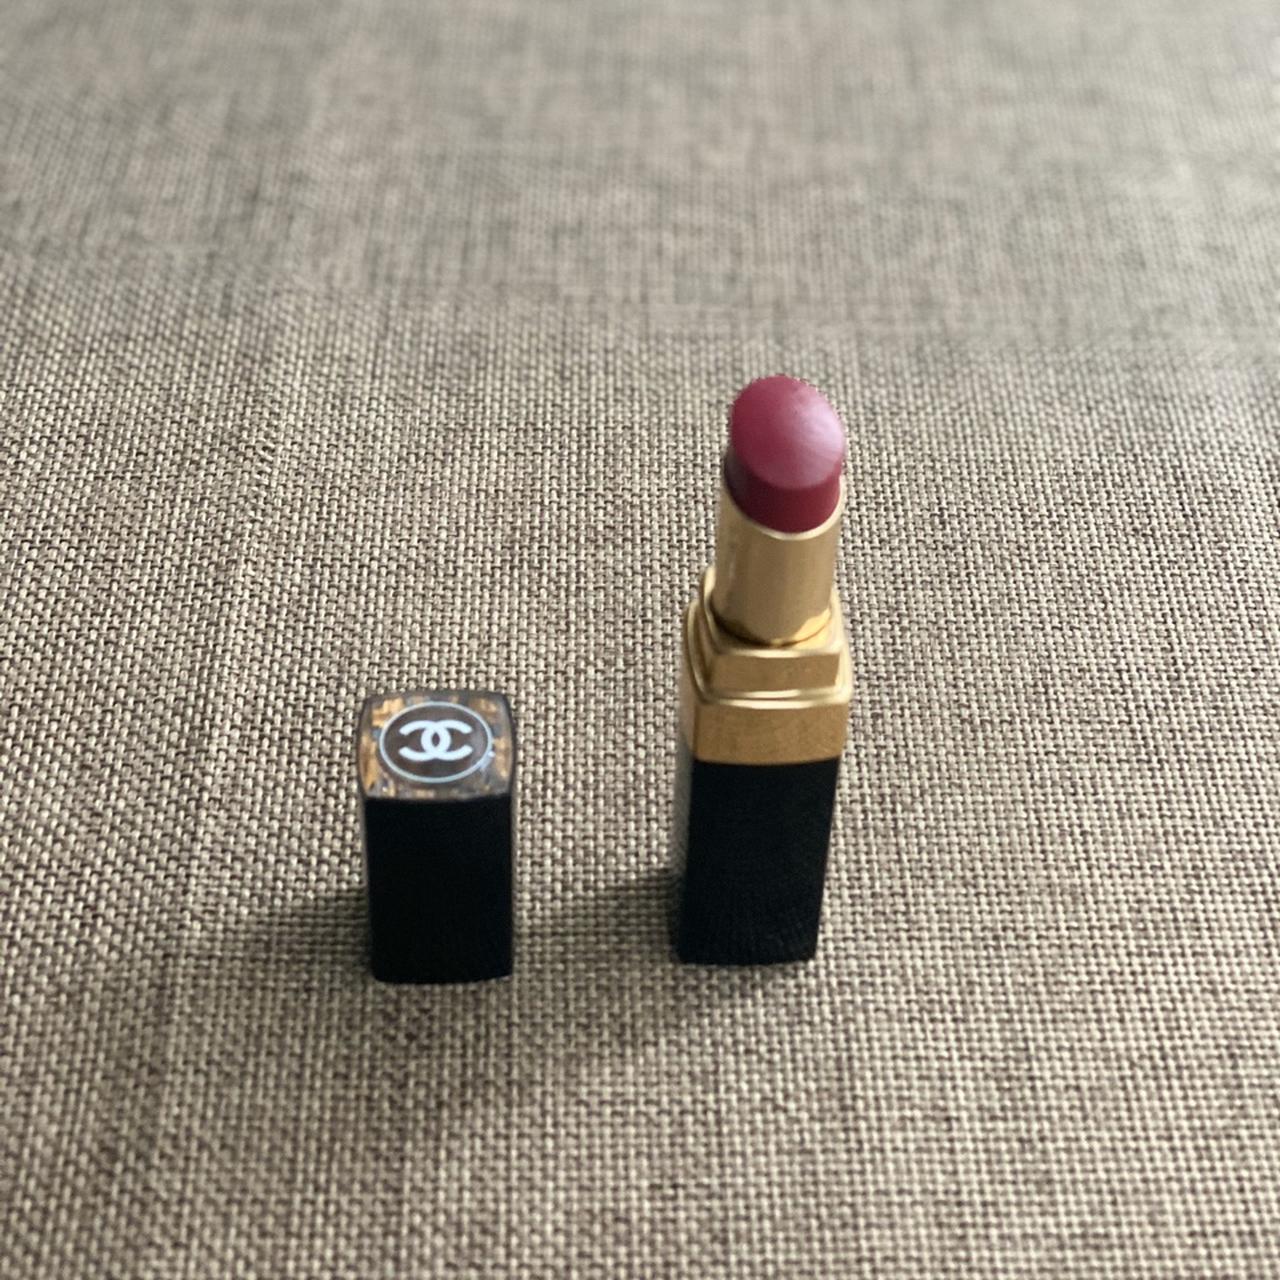 Chanel Rouge Coco Flash in 94 Desir, RRP